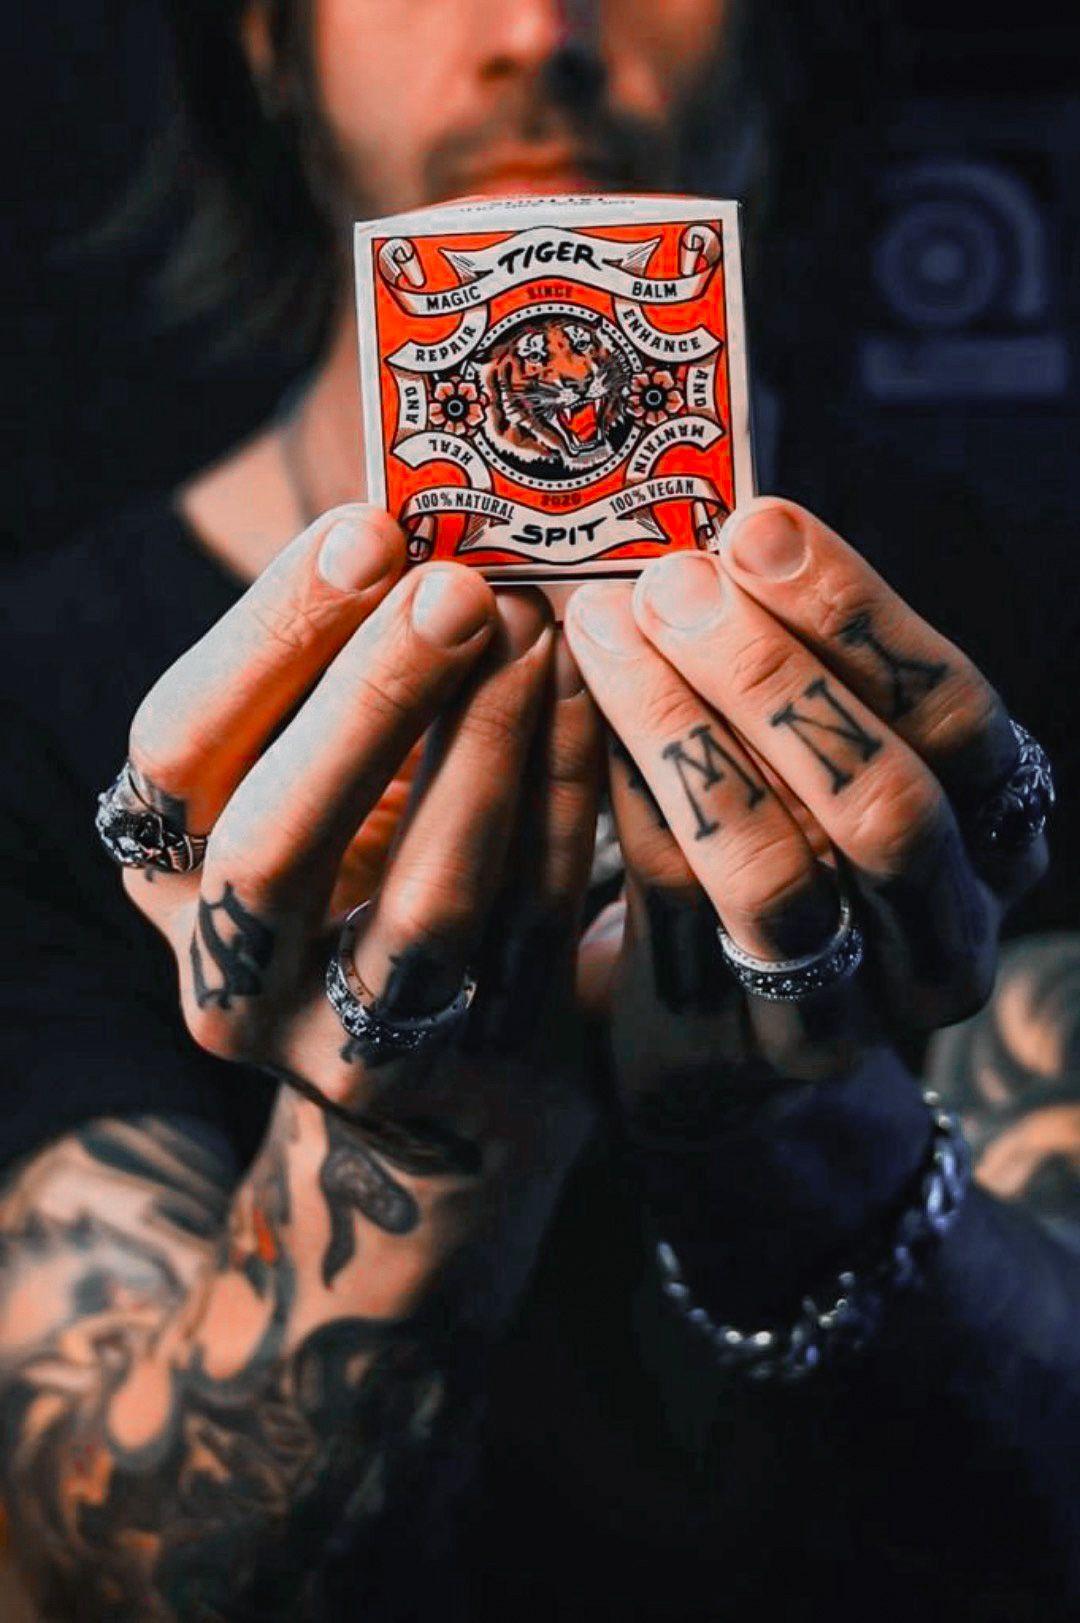 "TIGER SPIT TATTOO BALM: YOUR ULTIMATE SOLUTION IN TATTOO AFTERCARE"